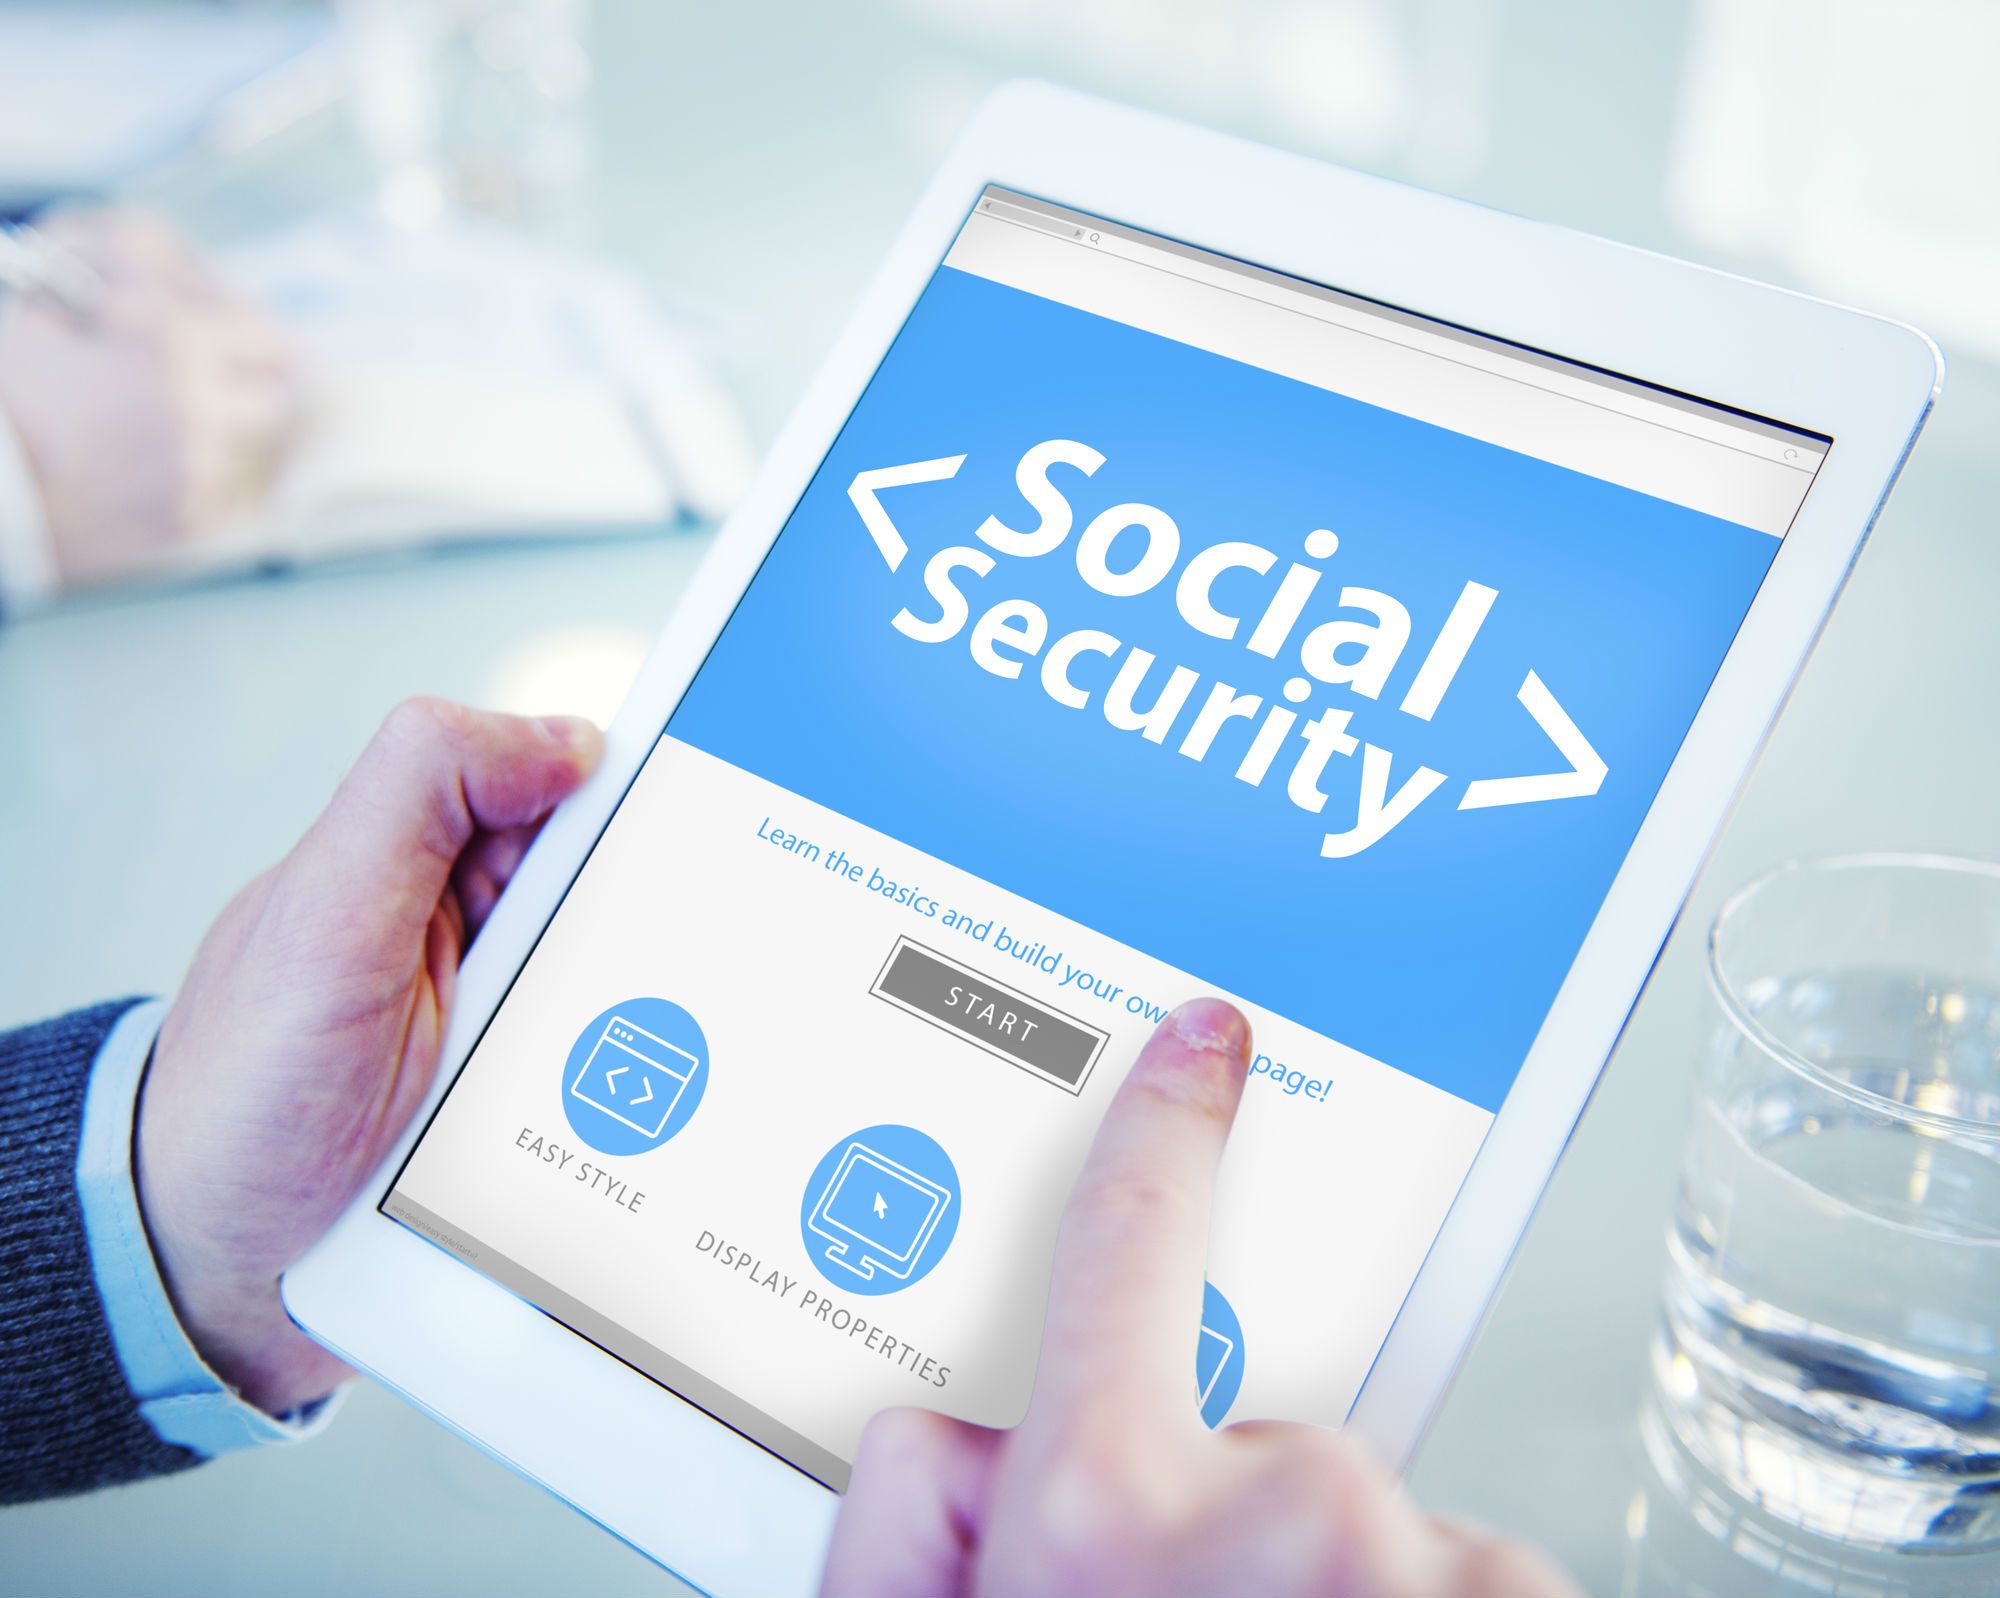 apply for Social Security disability benefits online or by calling a toll freExtensive information and documentation is needed to apply for Social Security Disability.